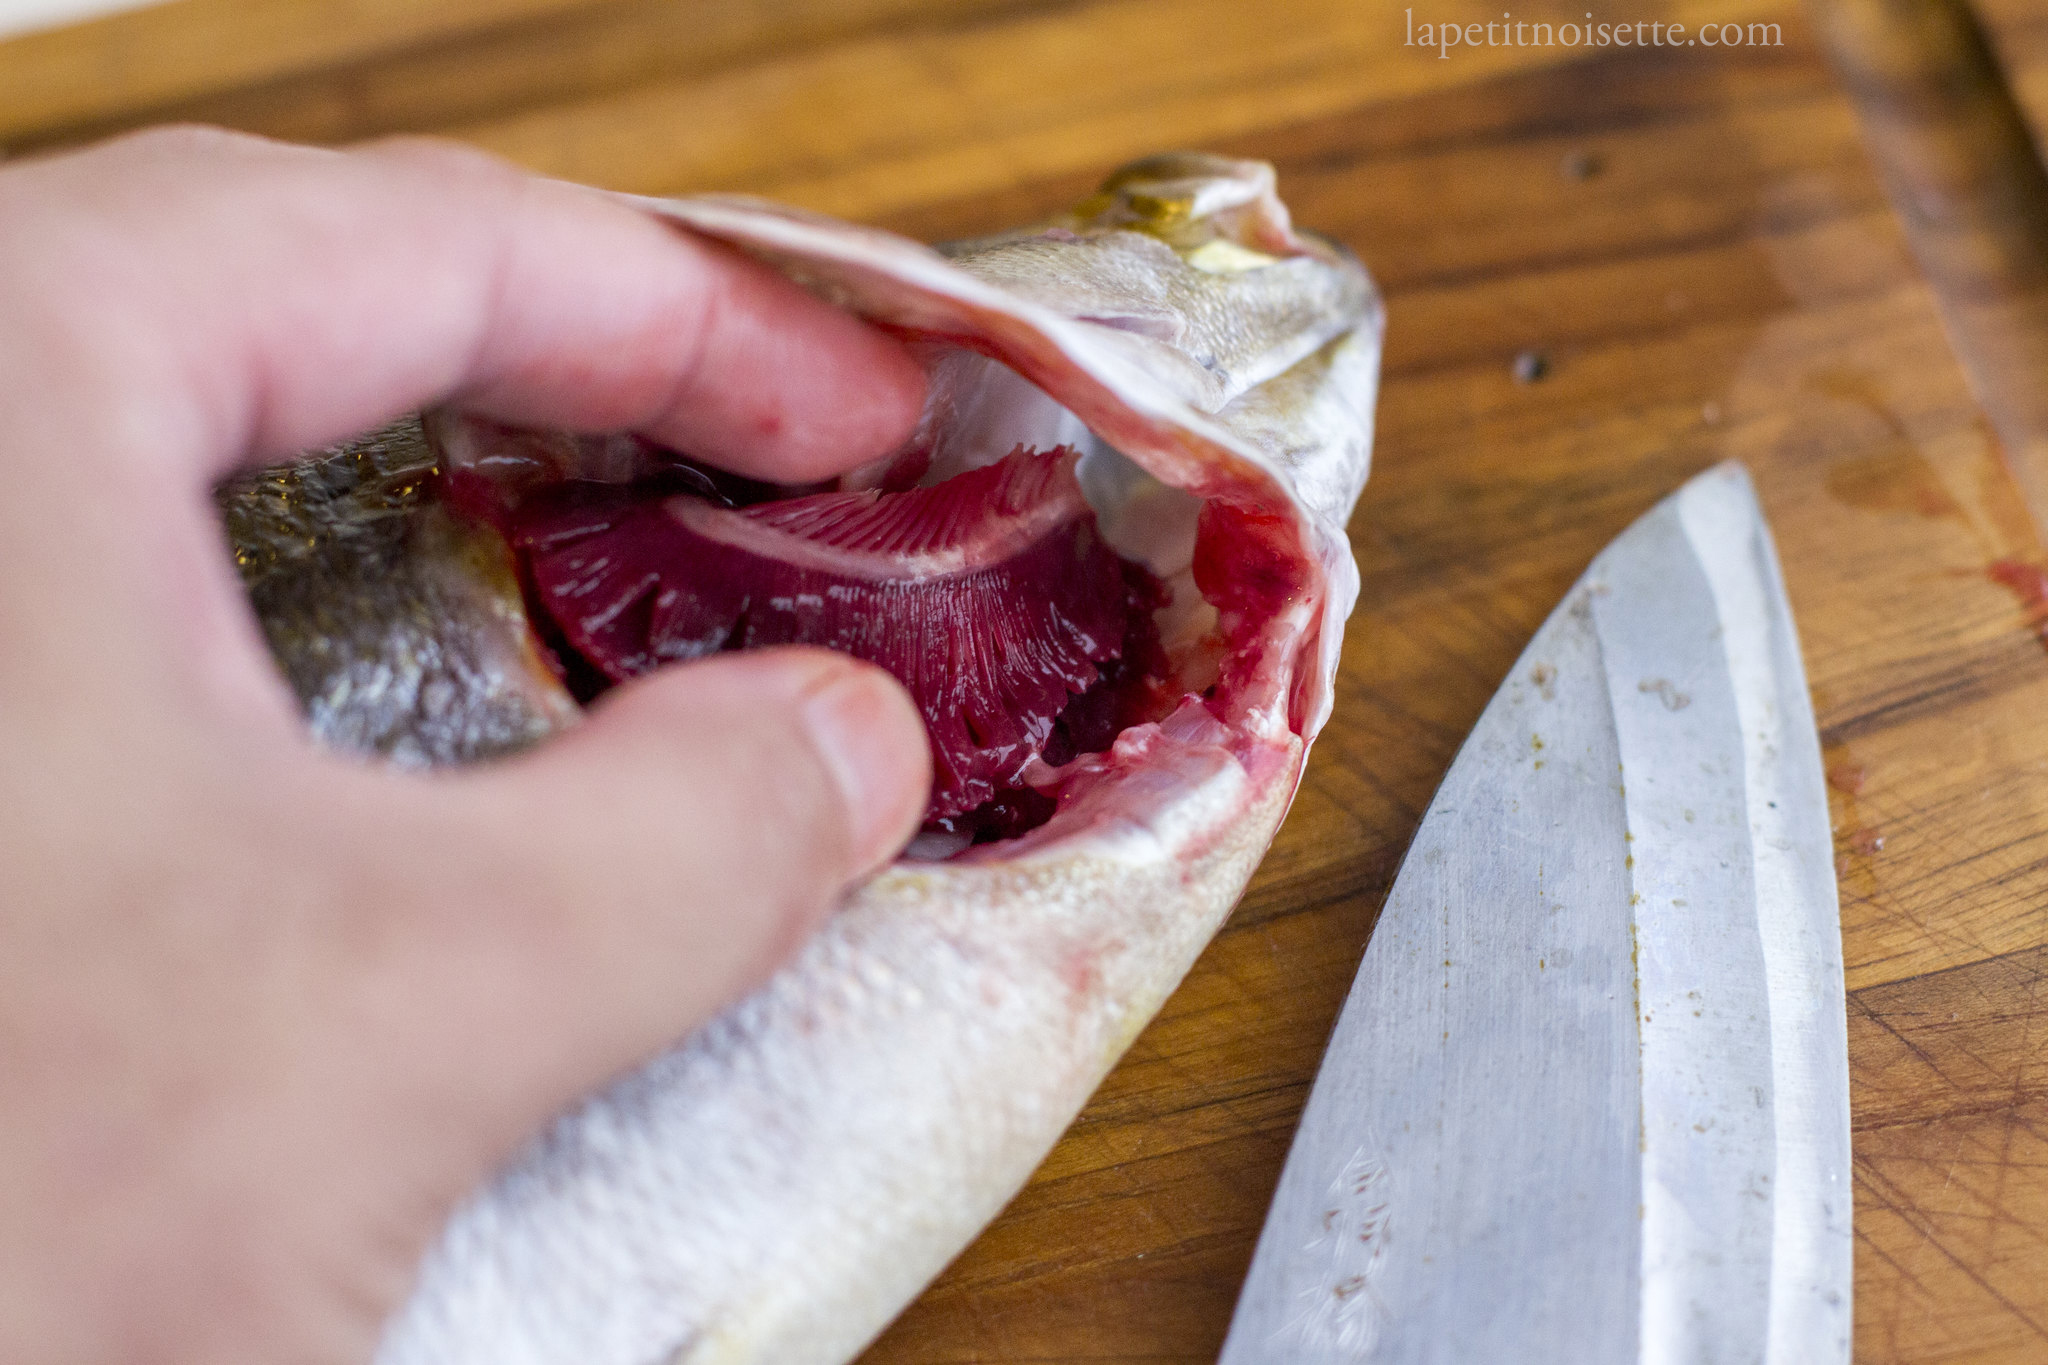 Removing the gills of an isaki fish for sushi preperation.